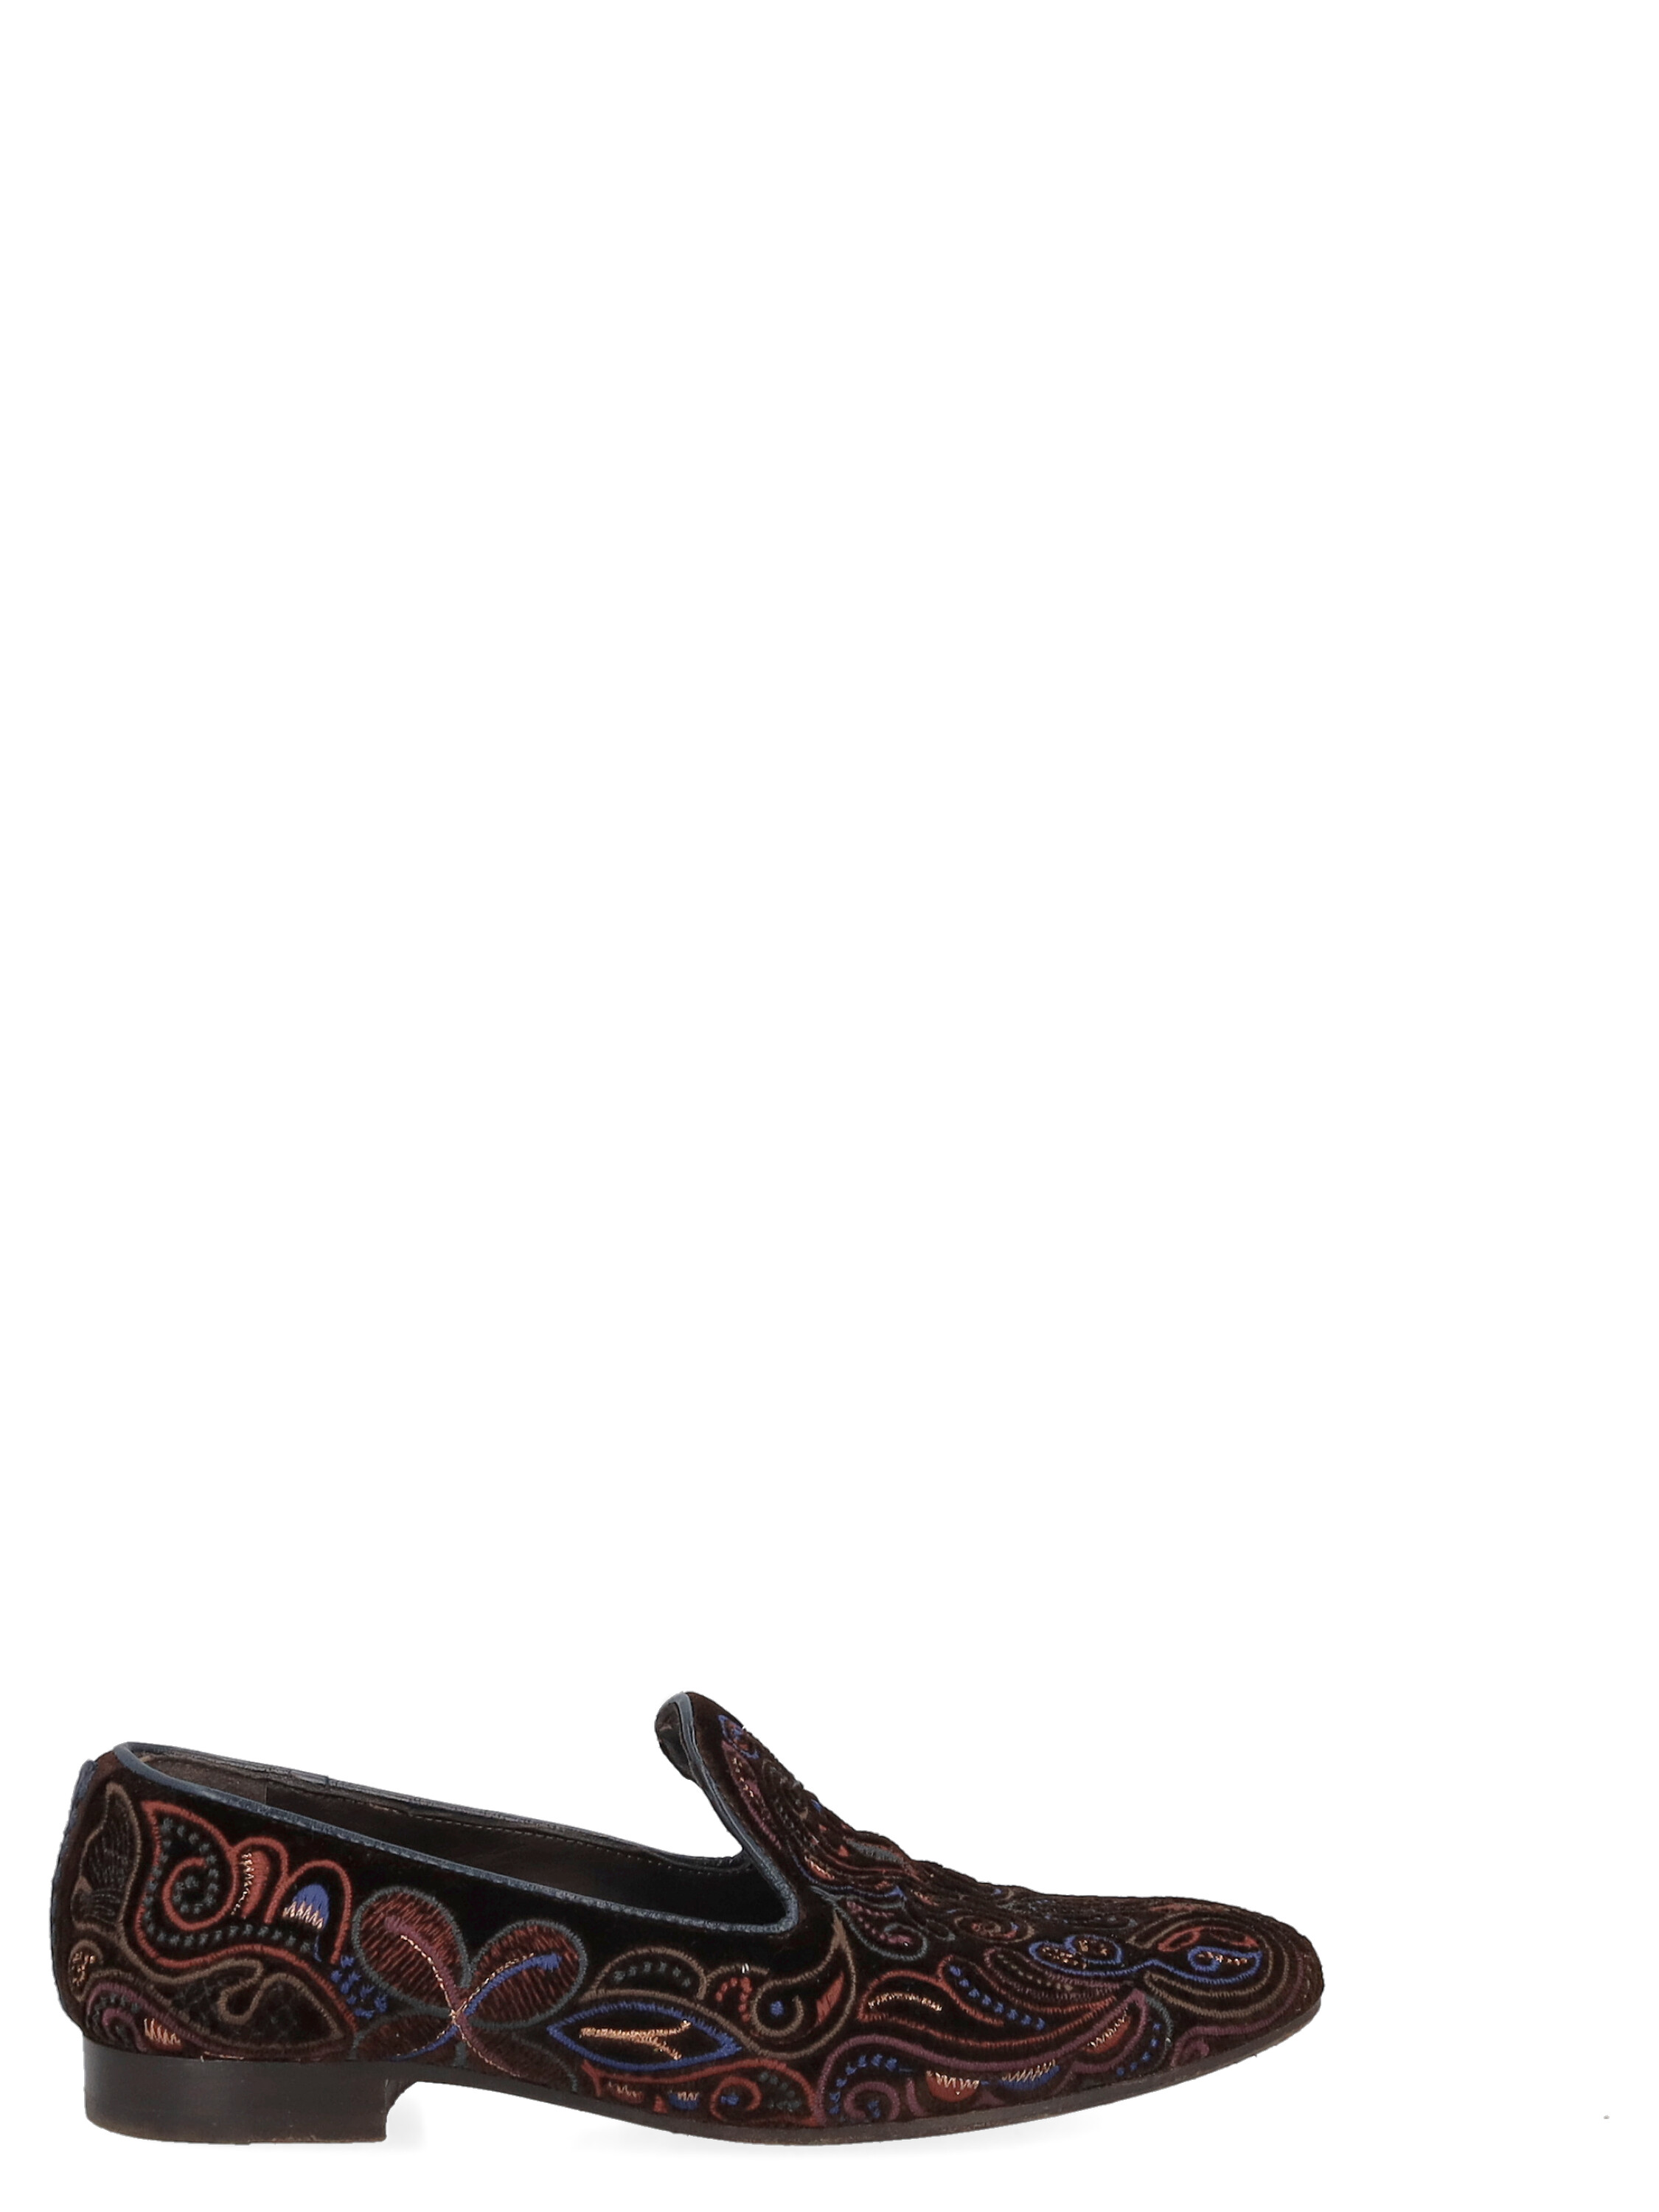 Pre-owned Fratelli Rossetti Women's Loafers -  - In Multicolor Fabric